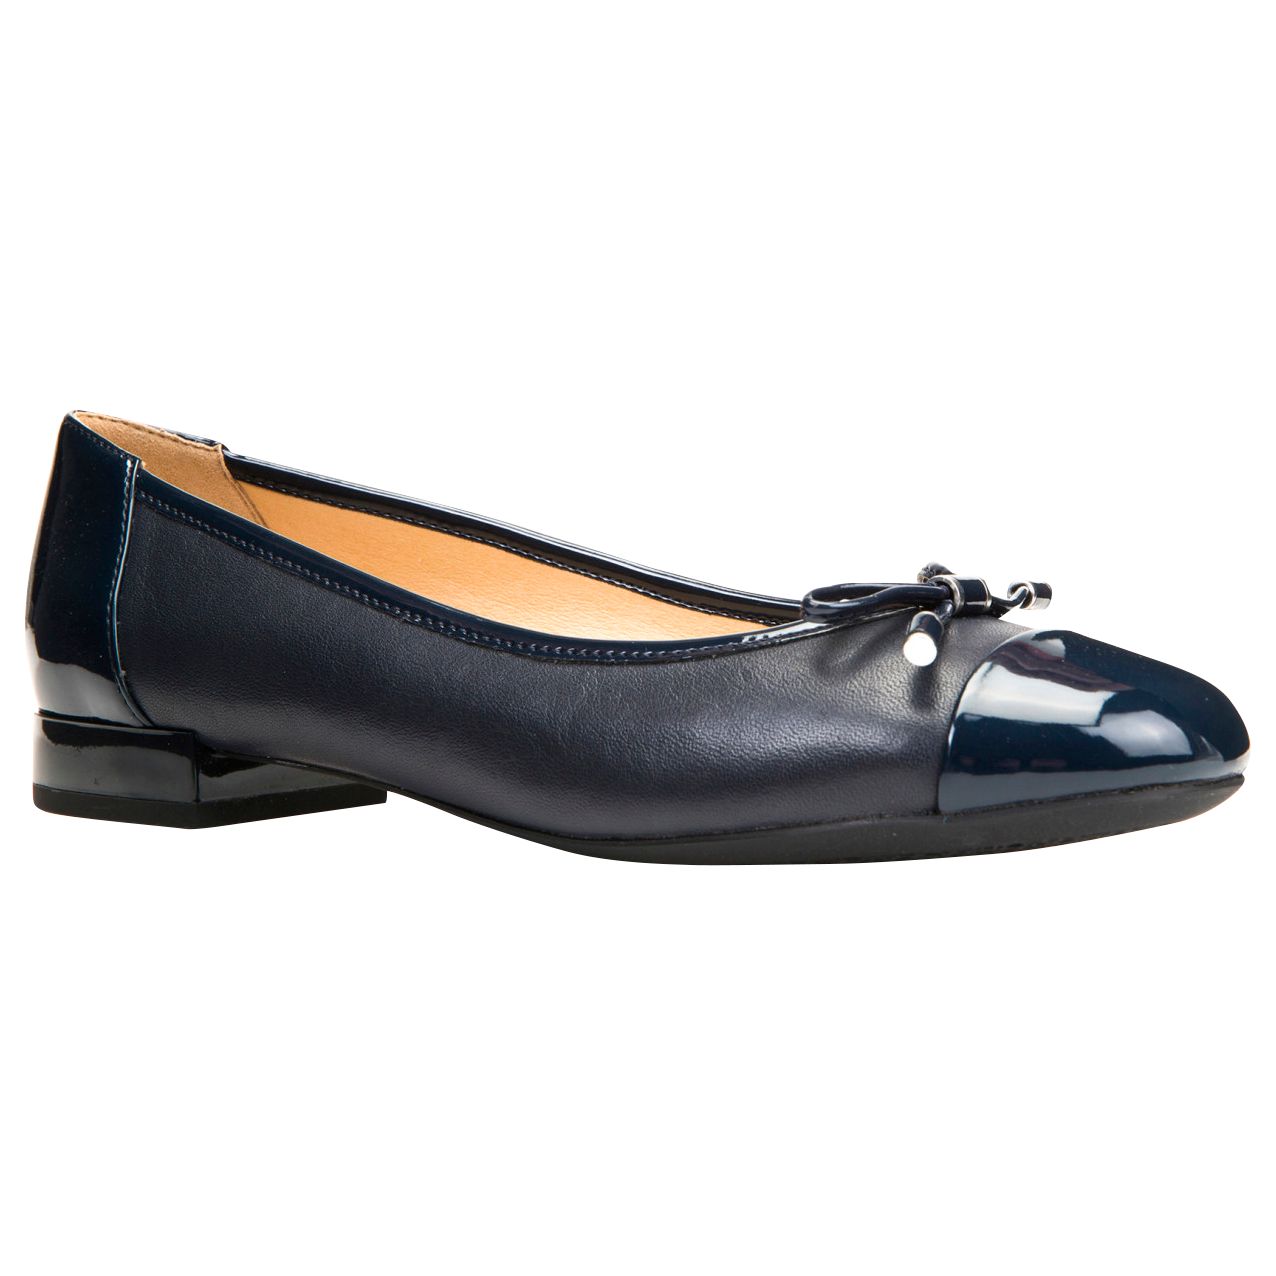 Geox Women's Wistrey Breathable Ballet Pumps, Navy Leather, 5